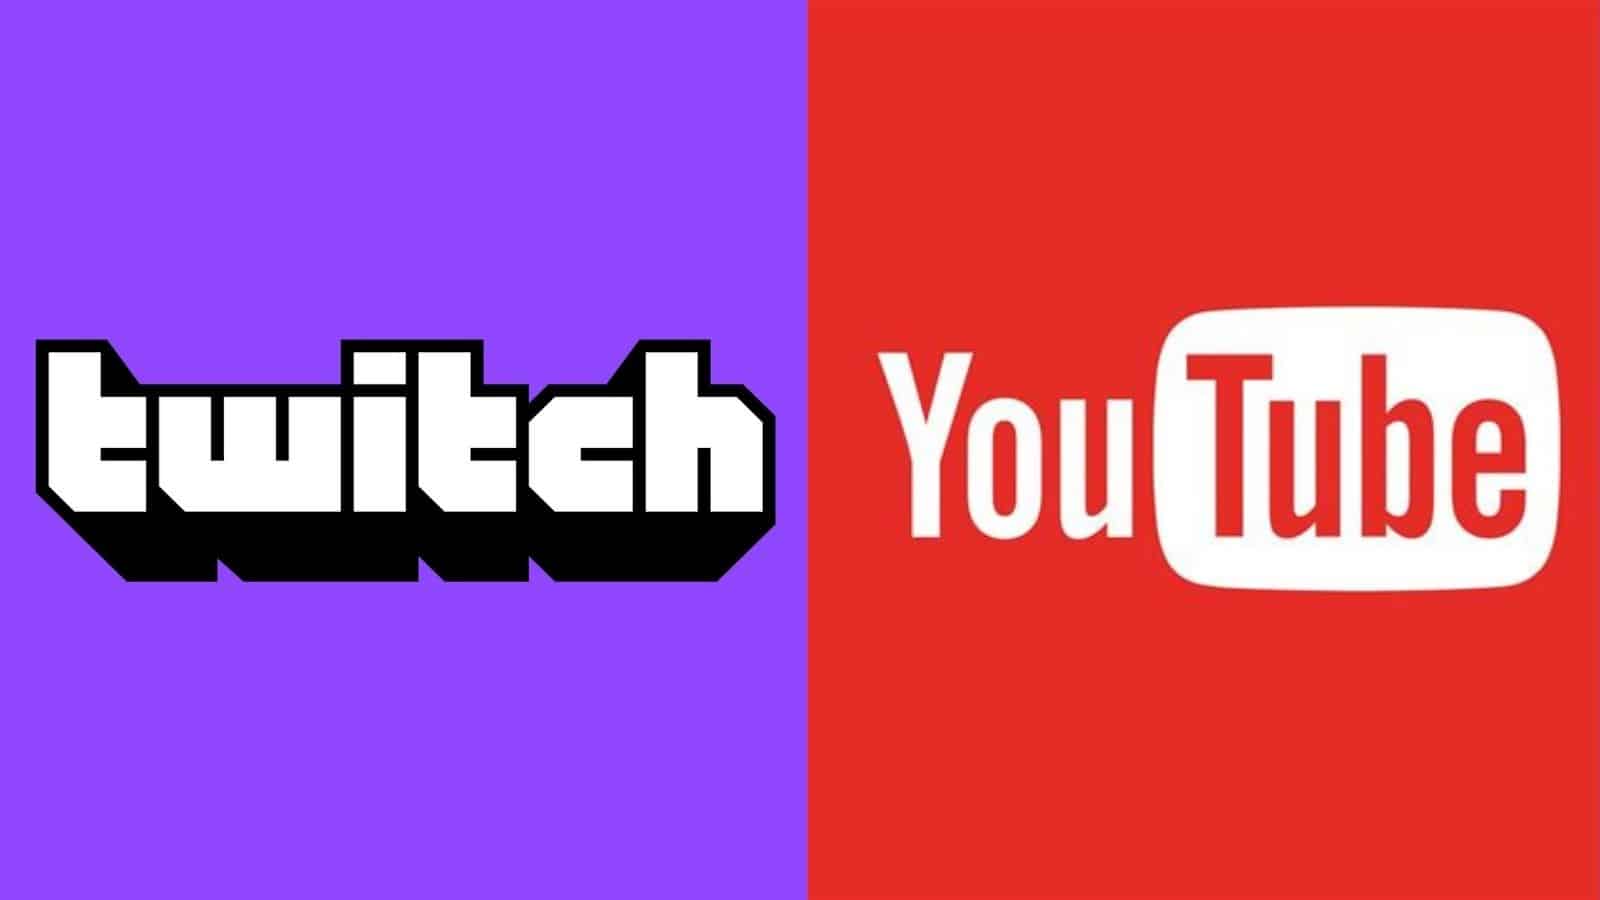 Twitch will allow partners to stream on other platforms now